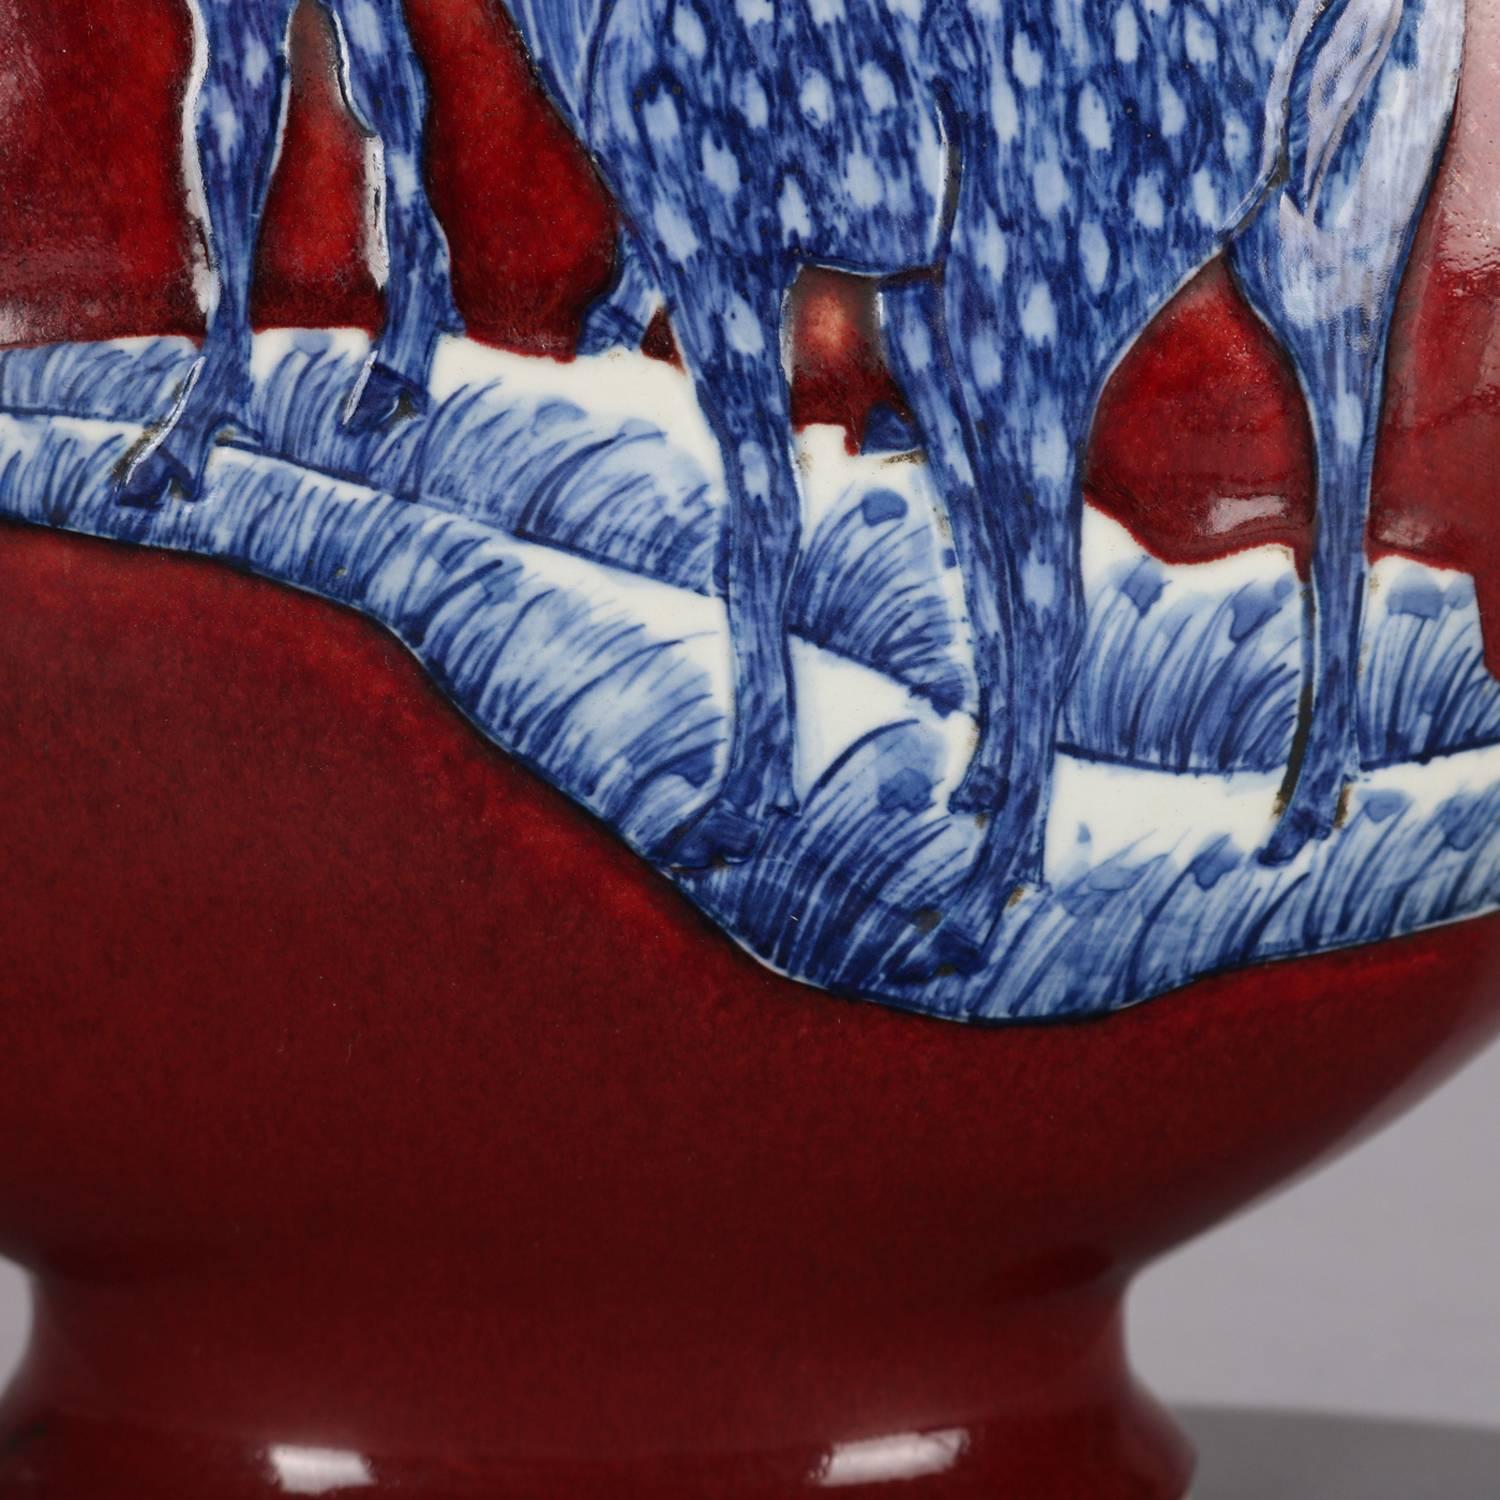 Chinese Hand-Painted Oxblood Moon Vase with Deer, Chop Mark Titled, 20th Century 8